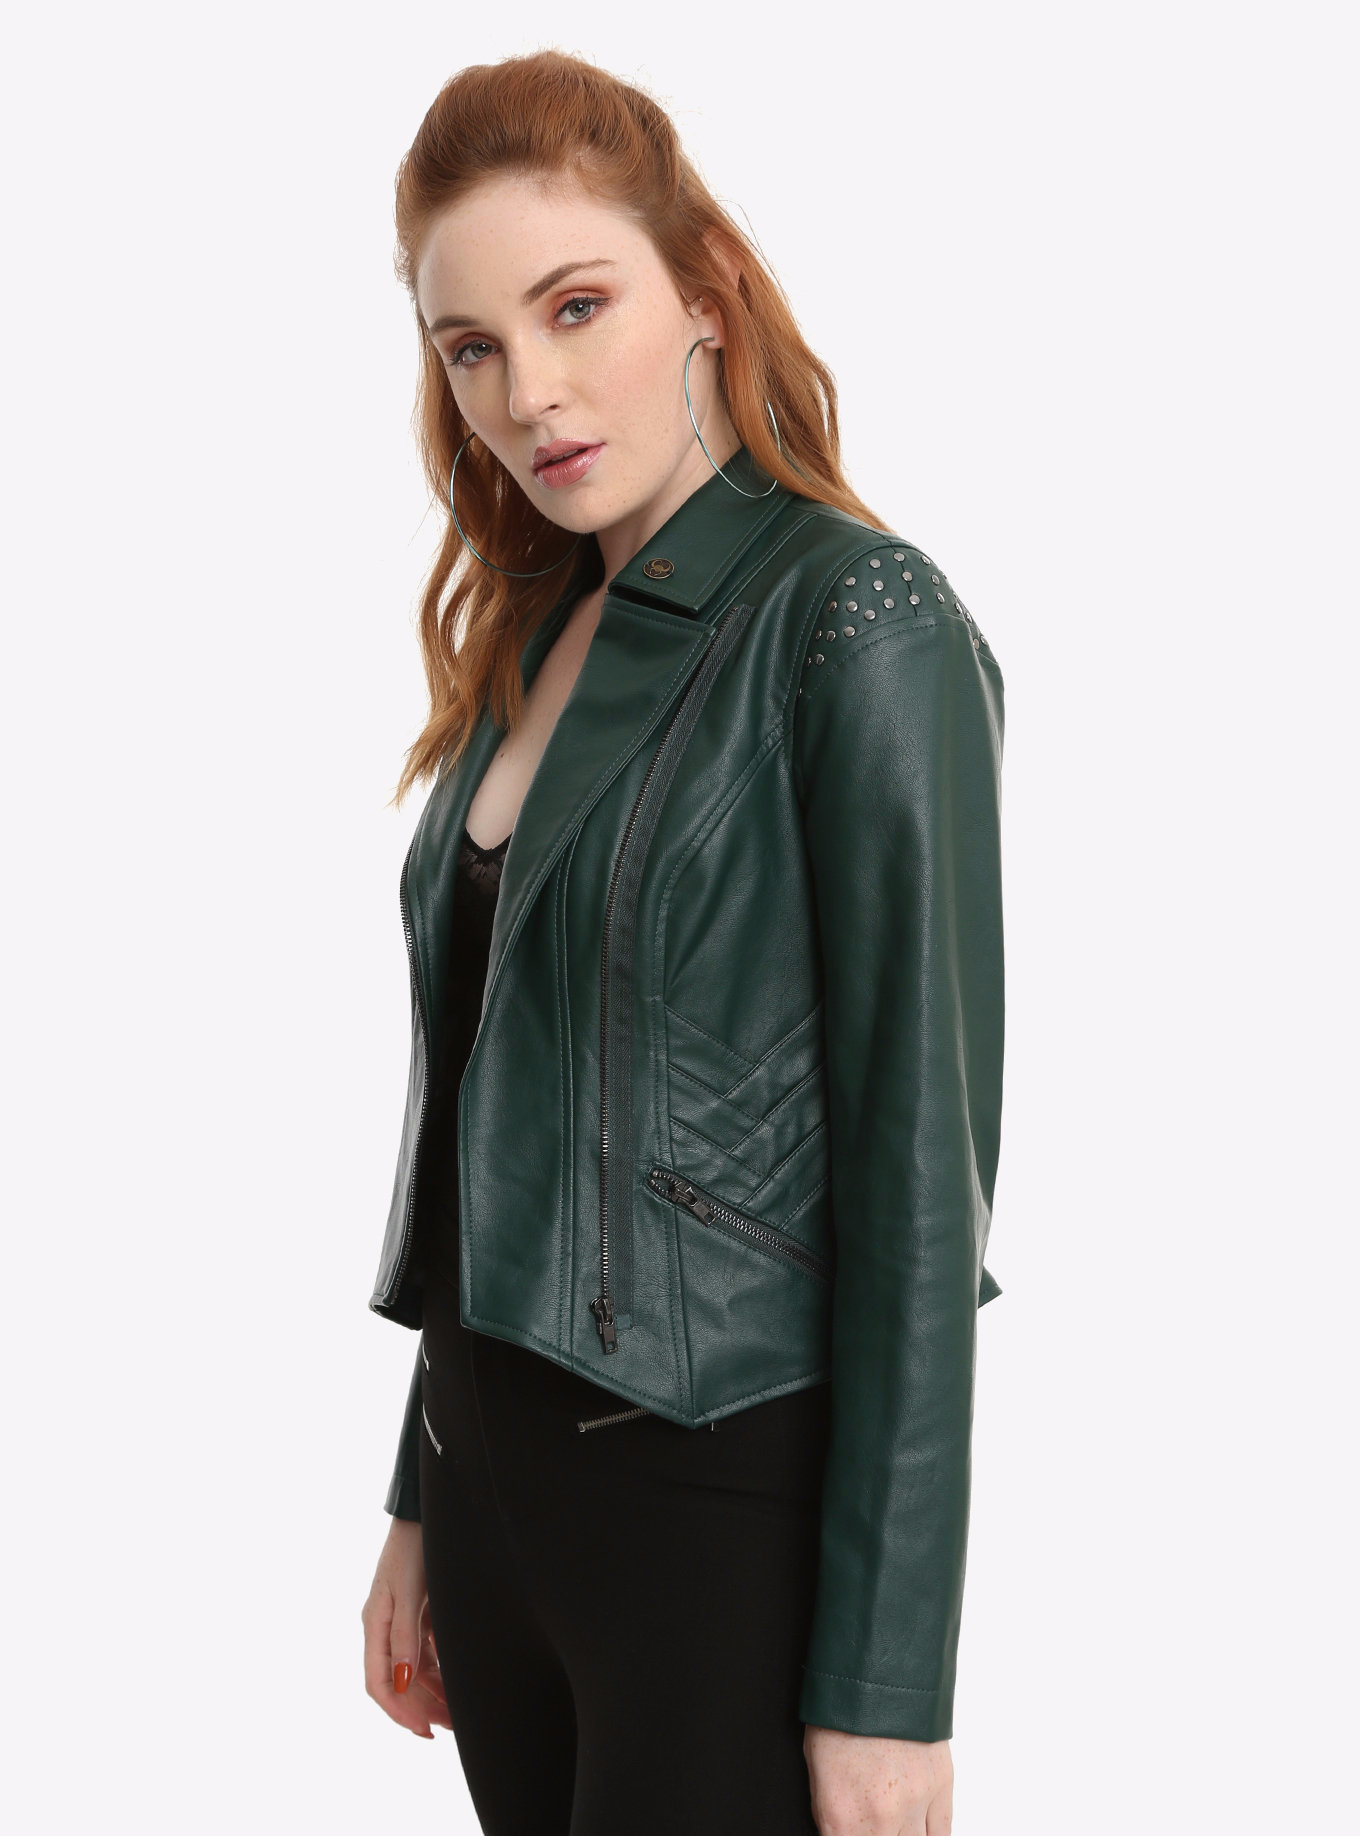 This Loki Clothing Line For Ladies Is Incredible